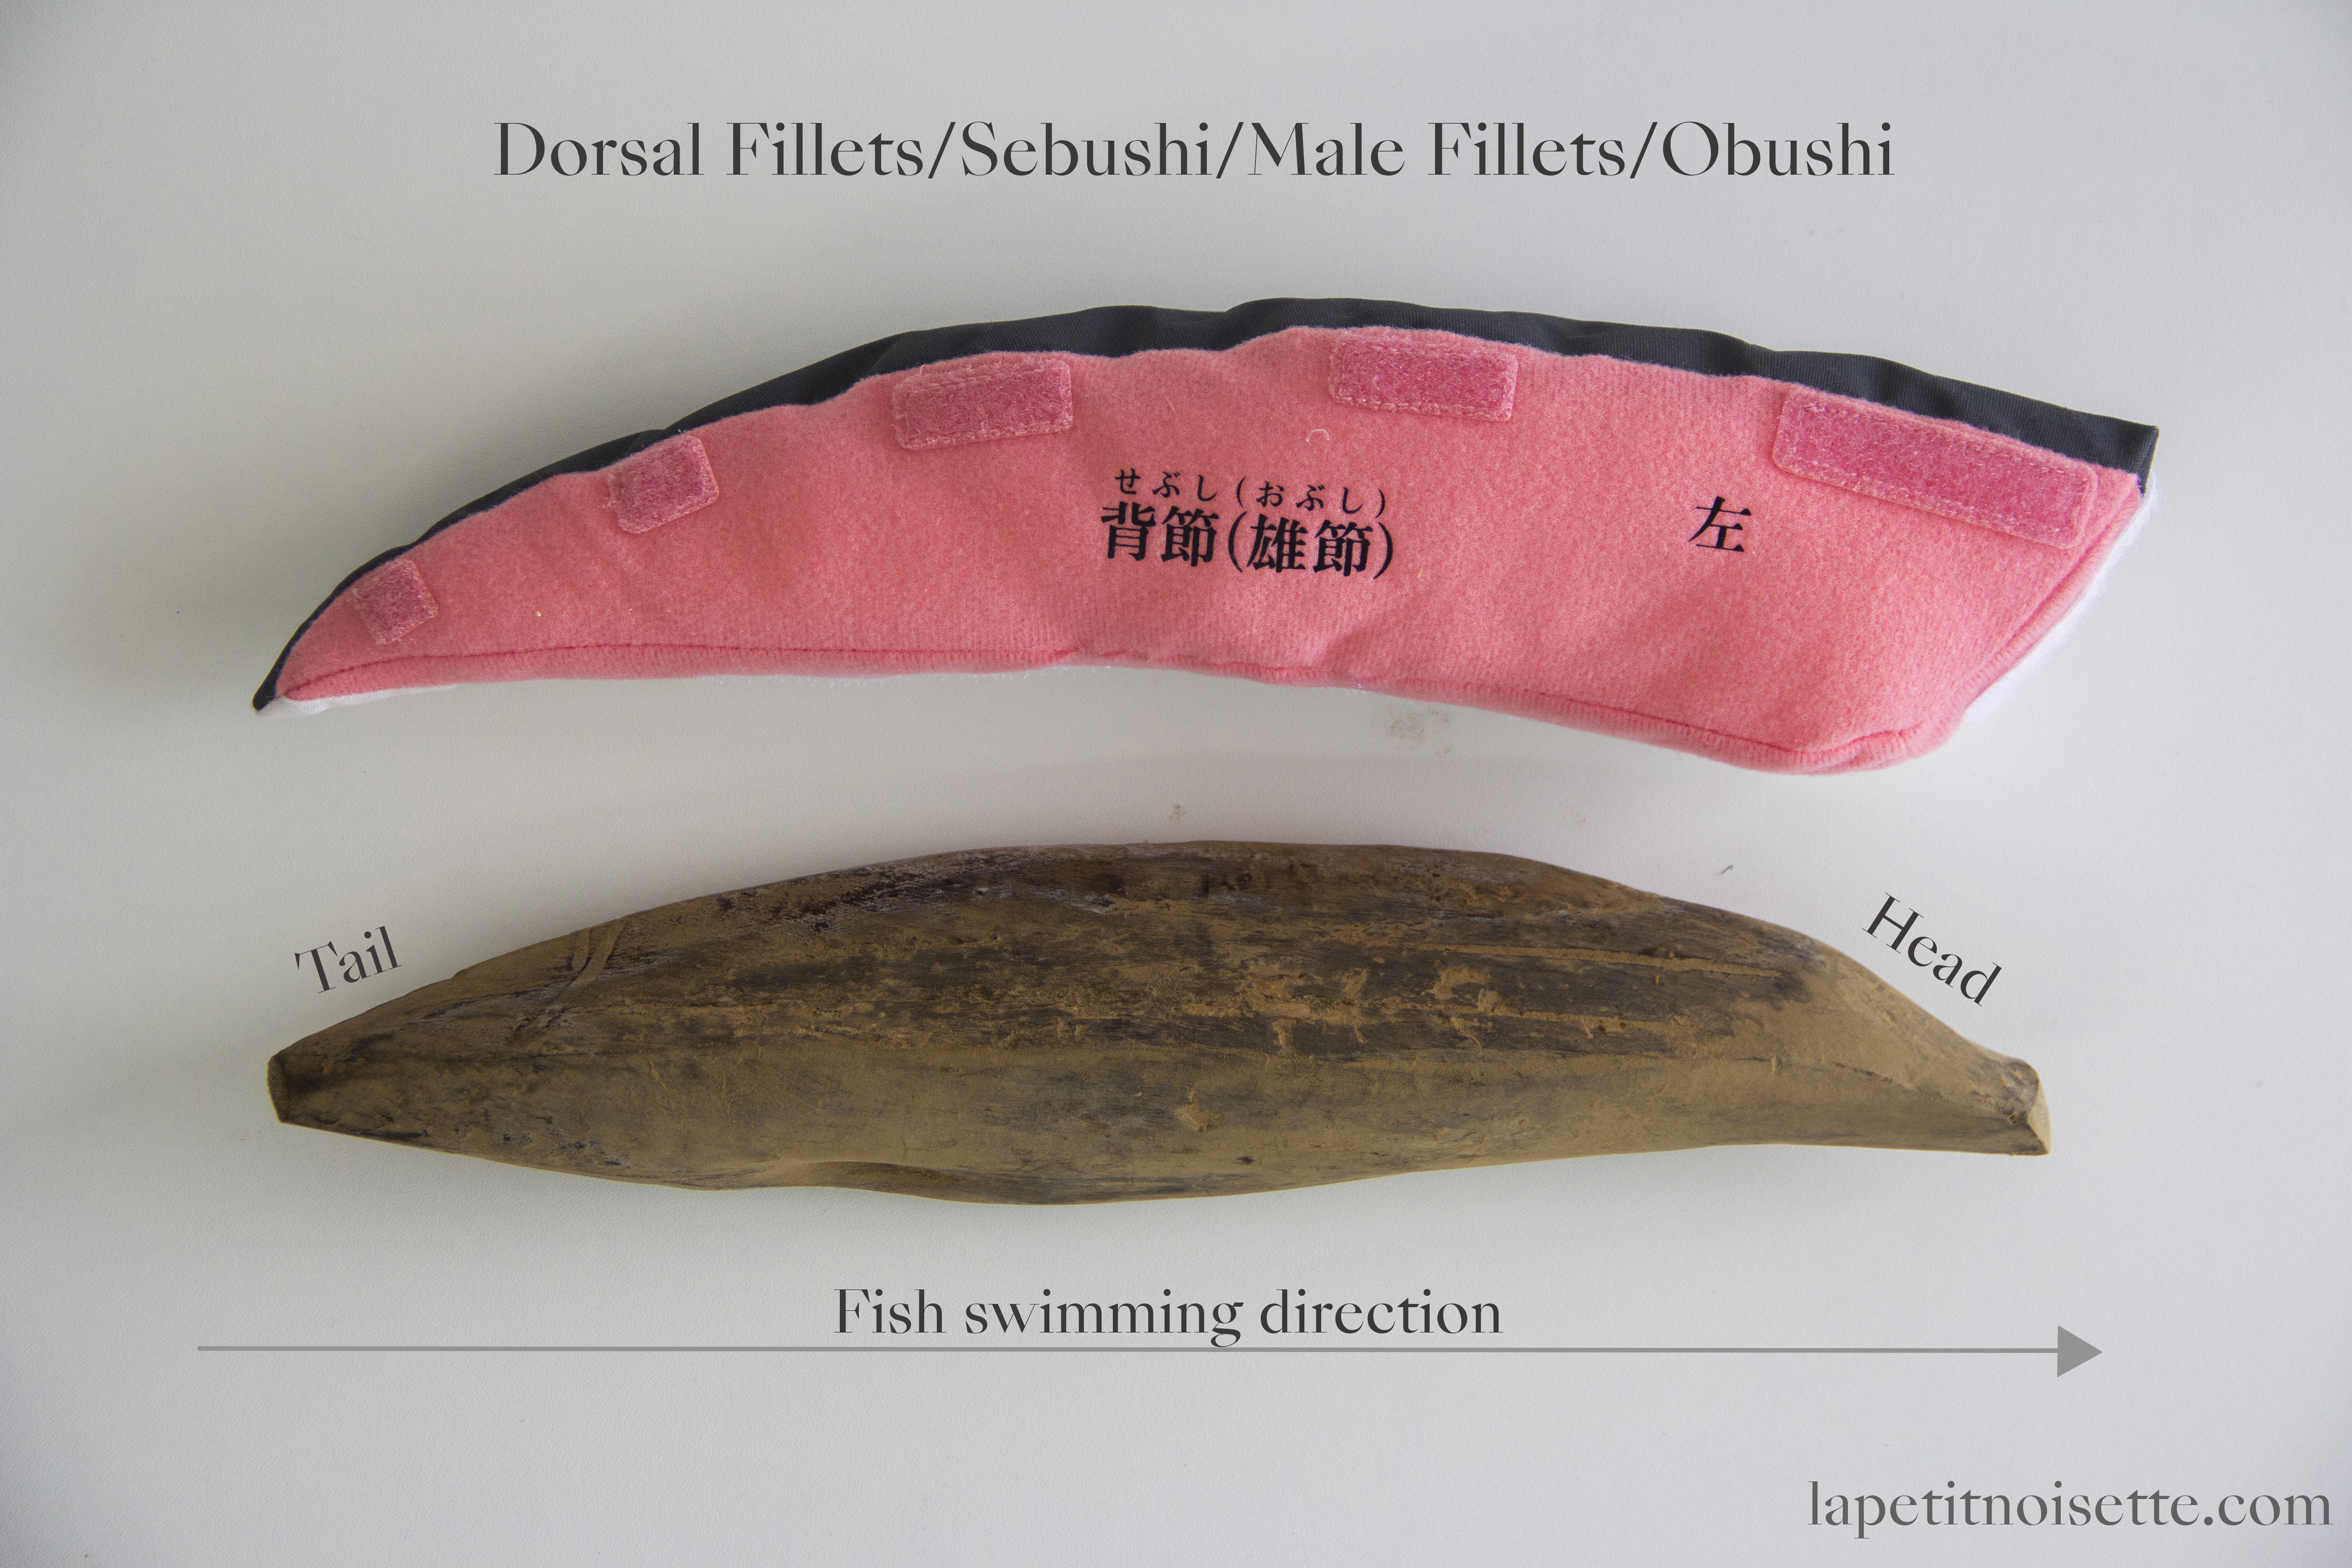 The left dorsal fillets of a katsuobushi are known as back fillets (背節 sebushi), or male fillets (雄節/男節 obushi) and it's corresponding part on a bonito, including the direction it faces is also shown.